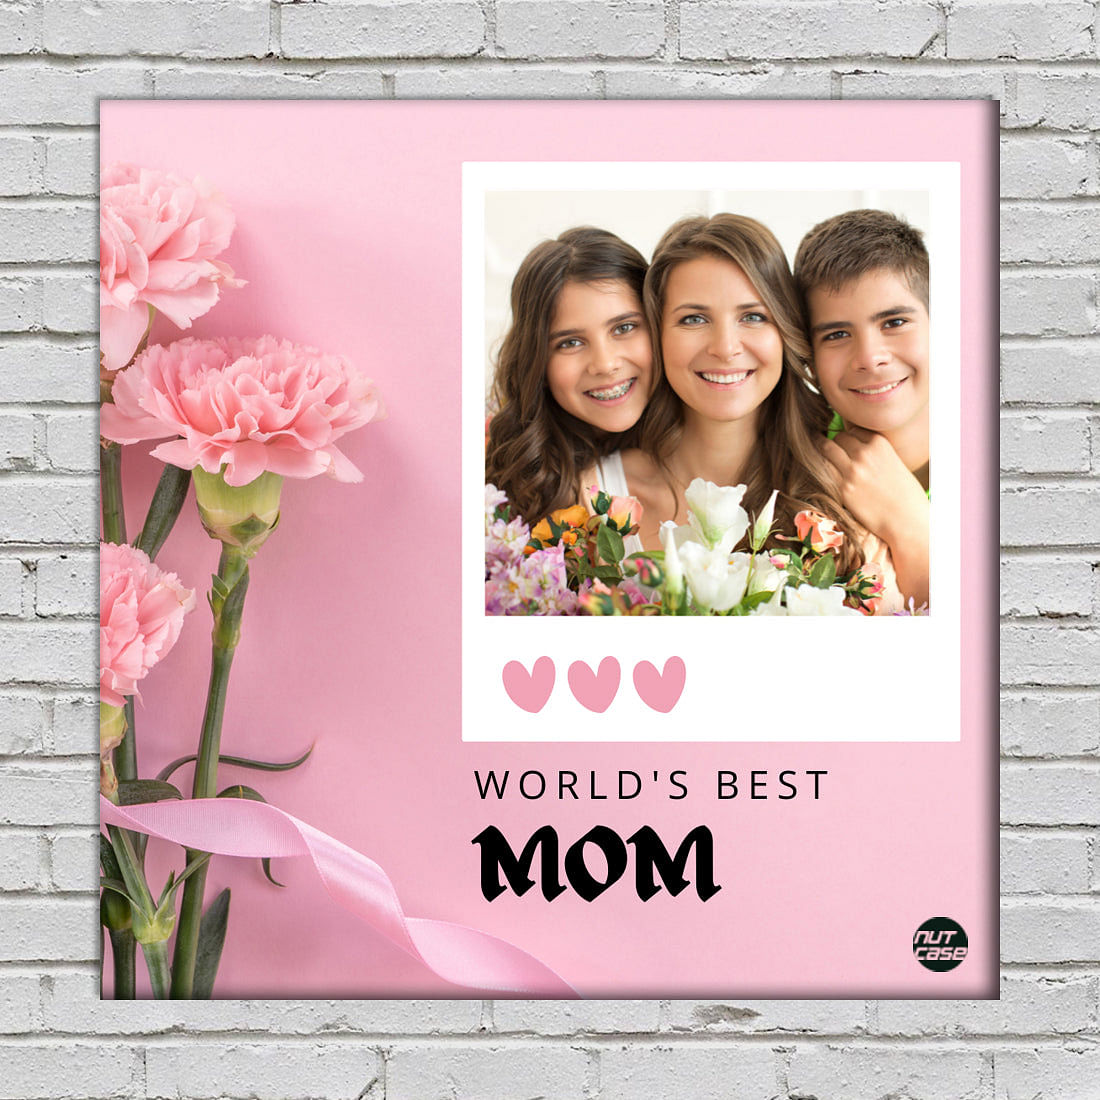 Personalized mothers day gifts Delhi.| Wooden Photo Plaques